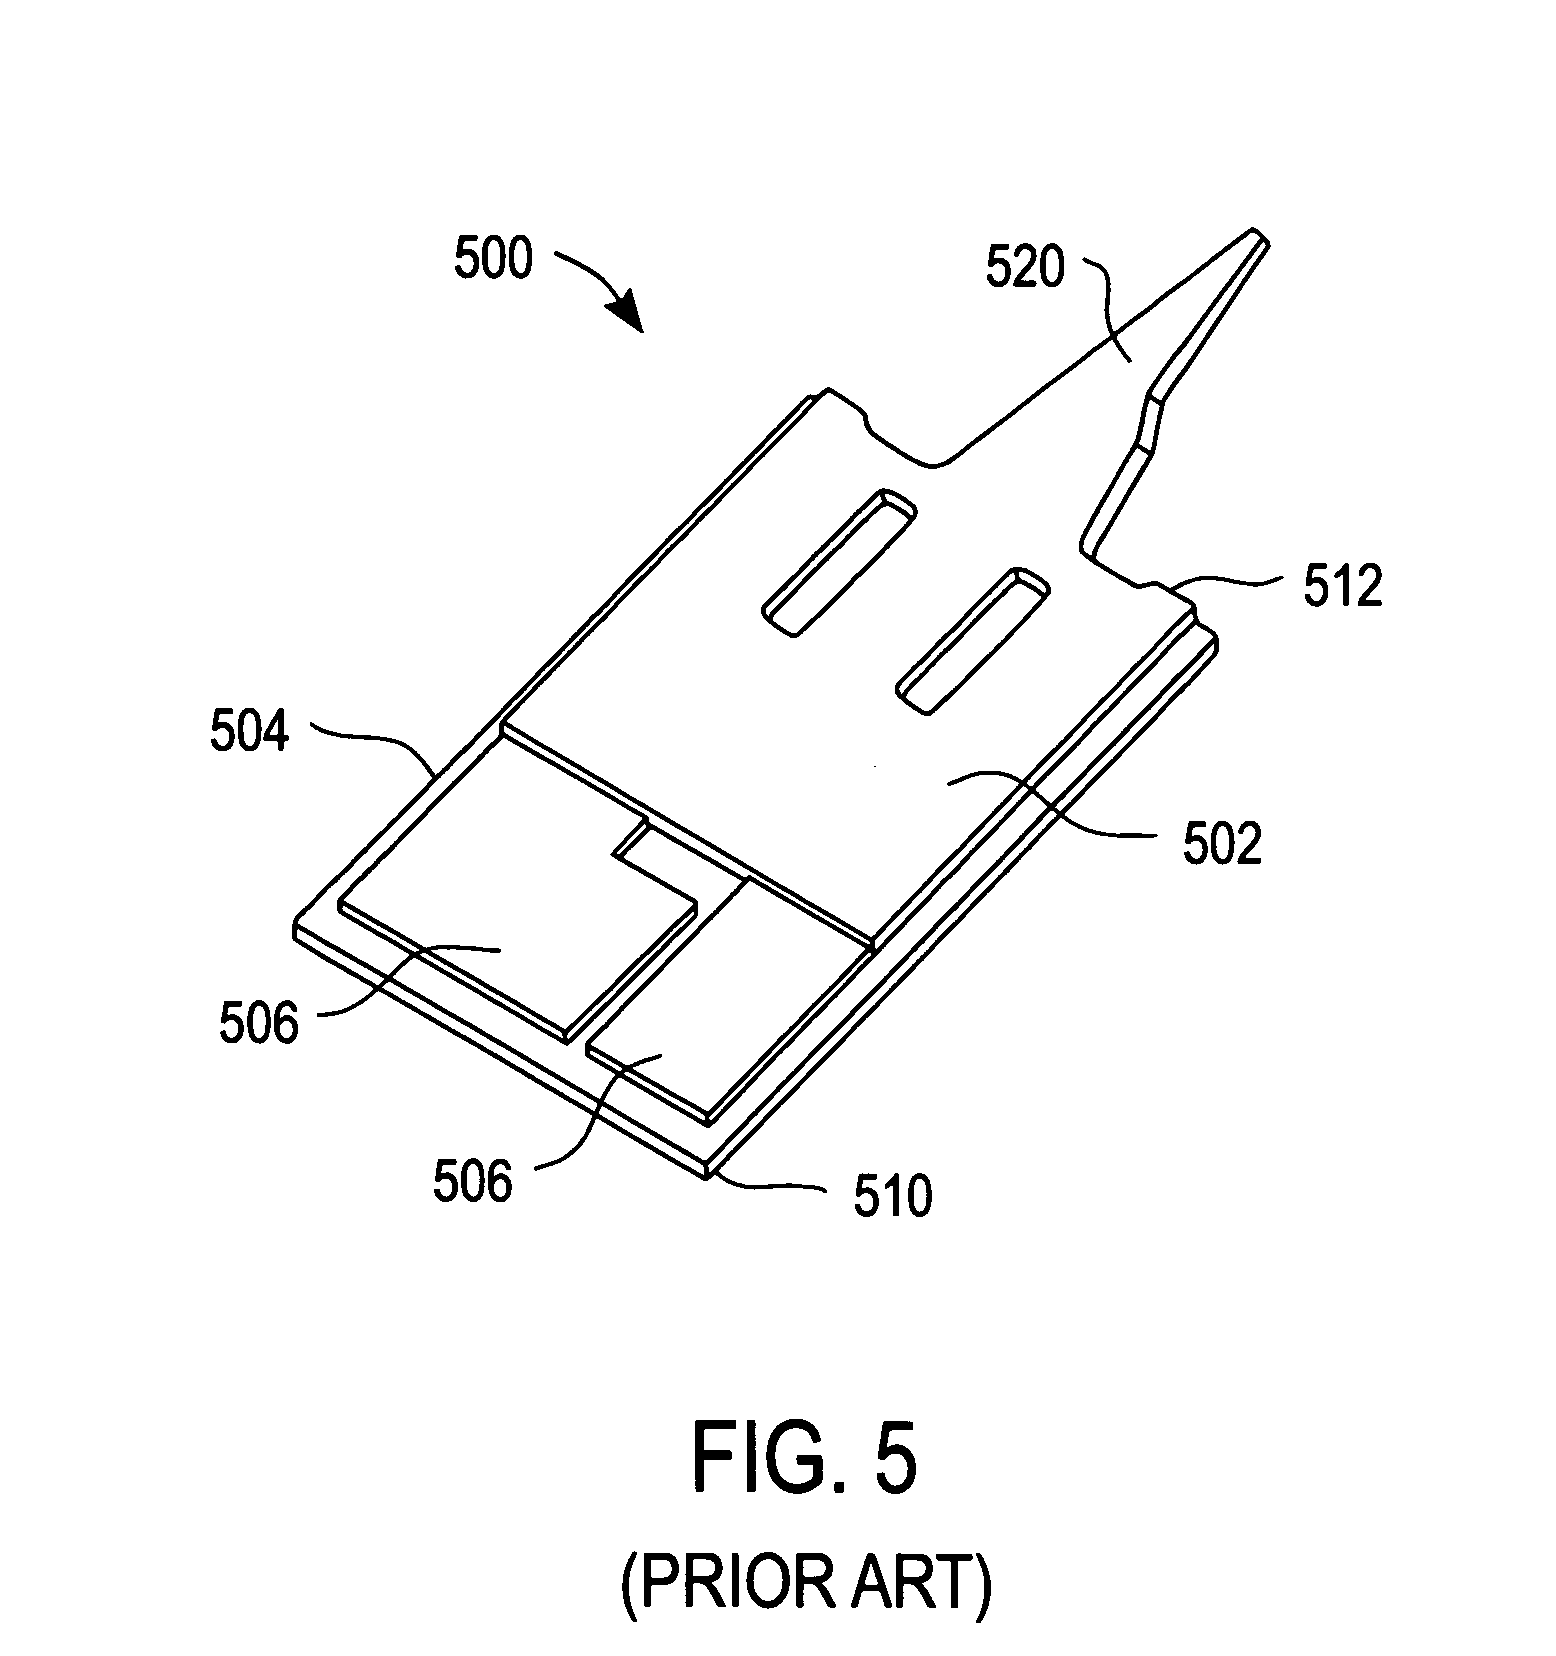 Medical device package with deformable projections